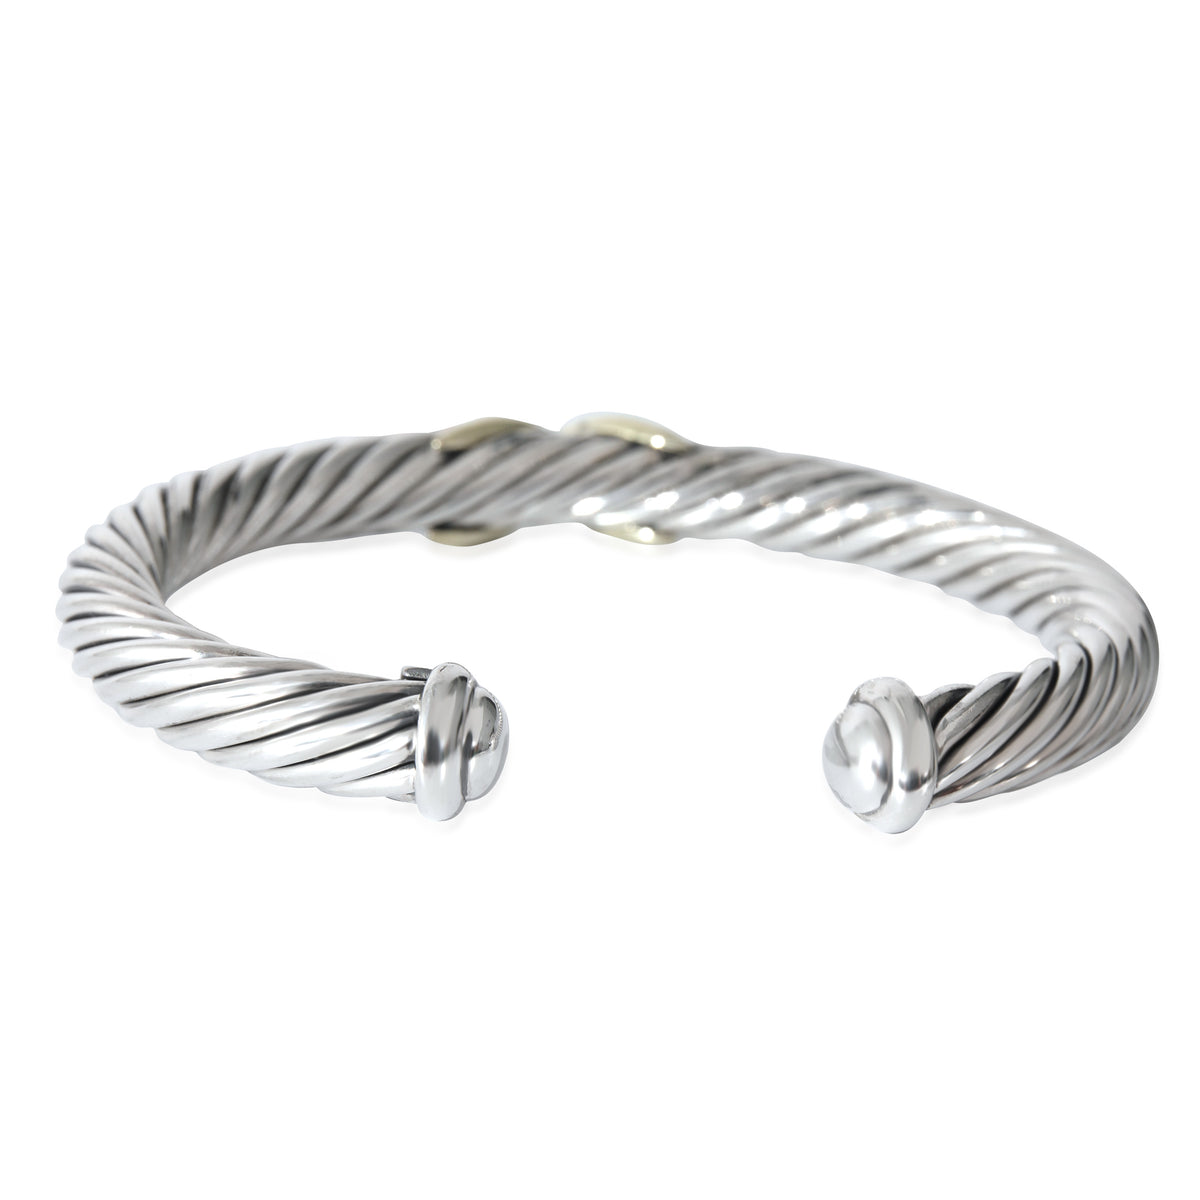 David Yurman Cable Collection Bracelet in 925 Yellow Gold/Sterling Silver, 7mm